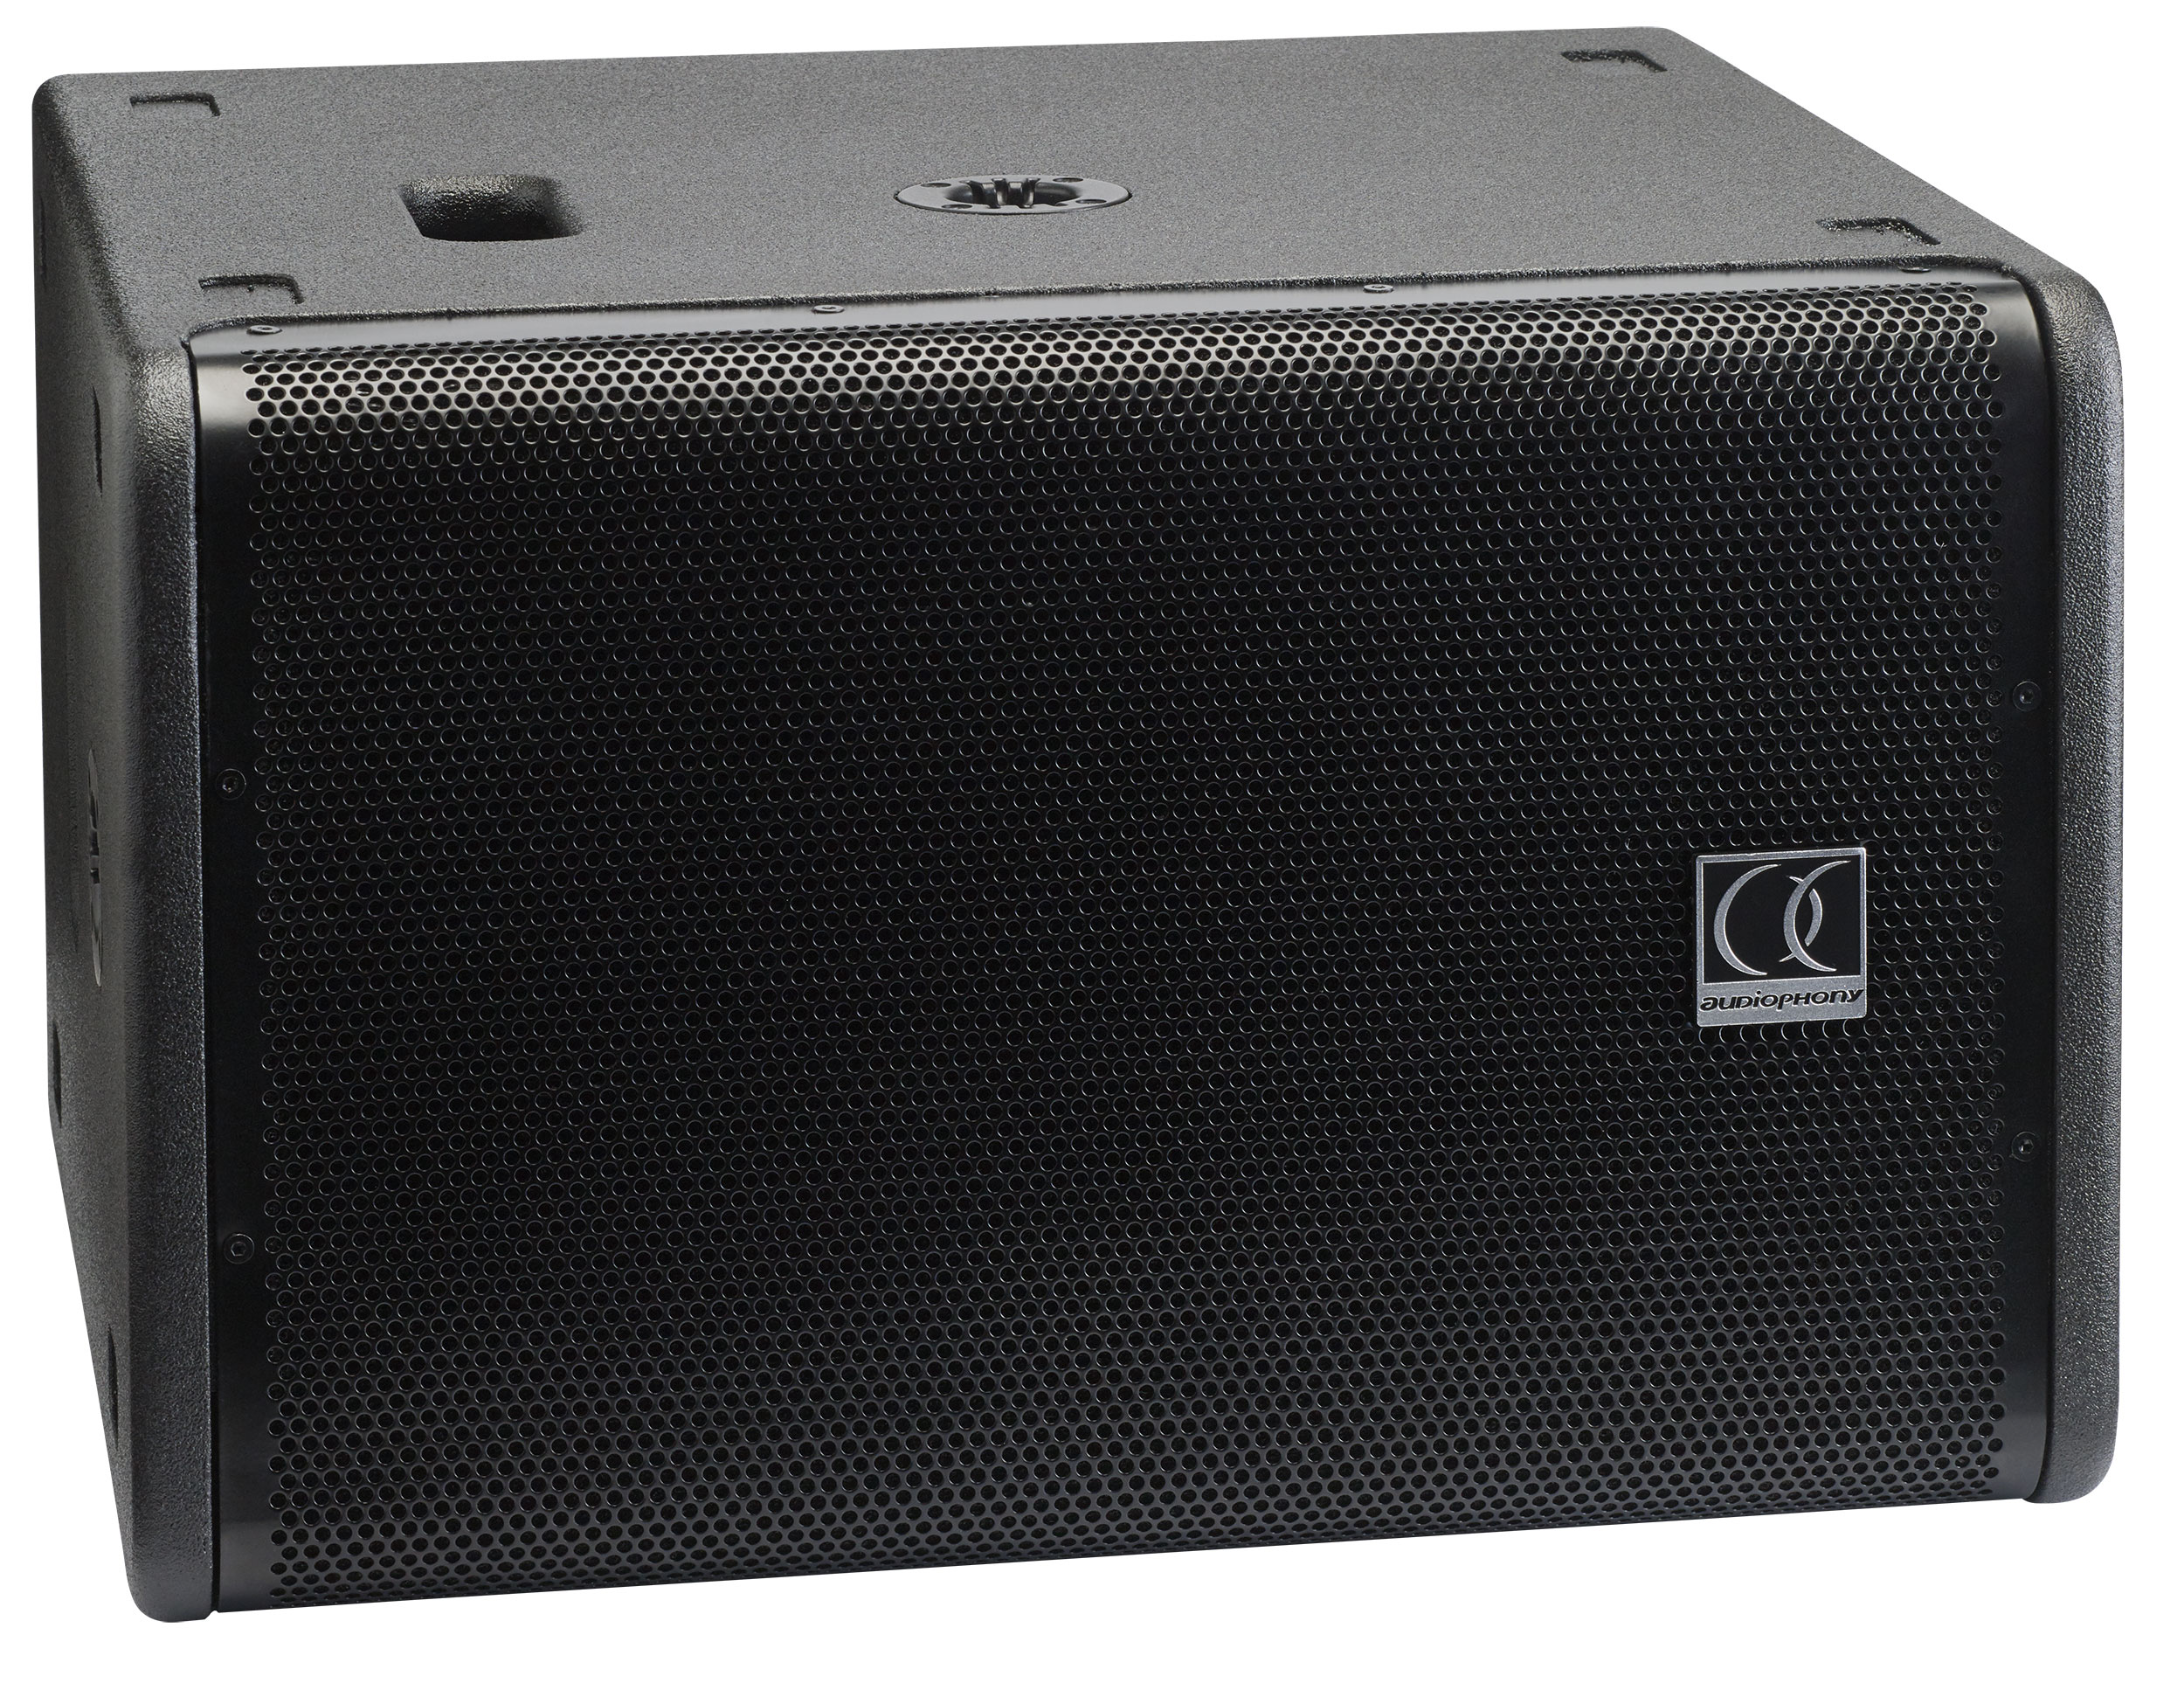 12" active subwoofer 700W + 700W with integrated DSP